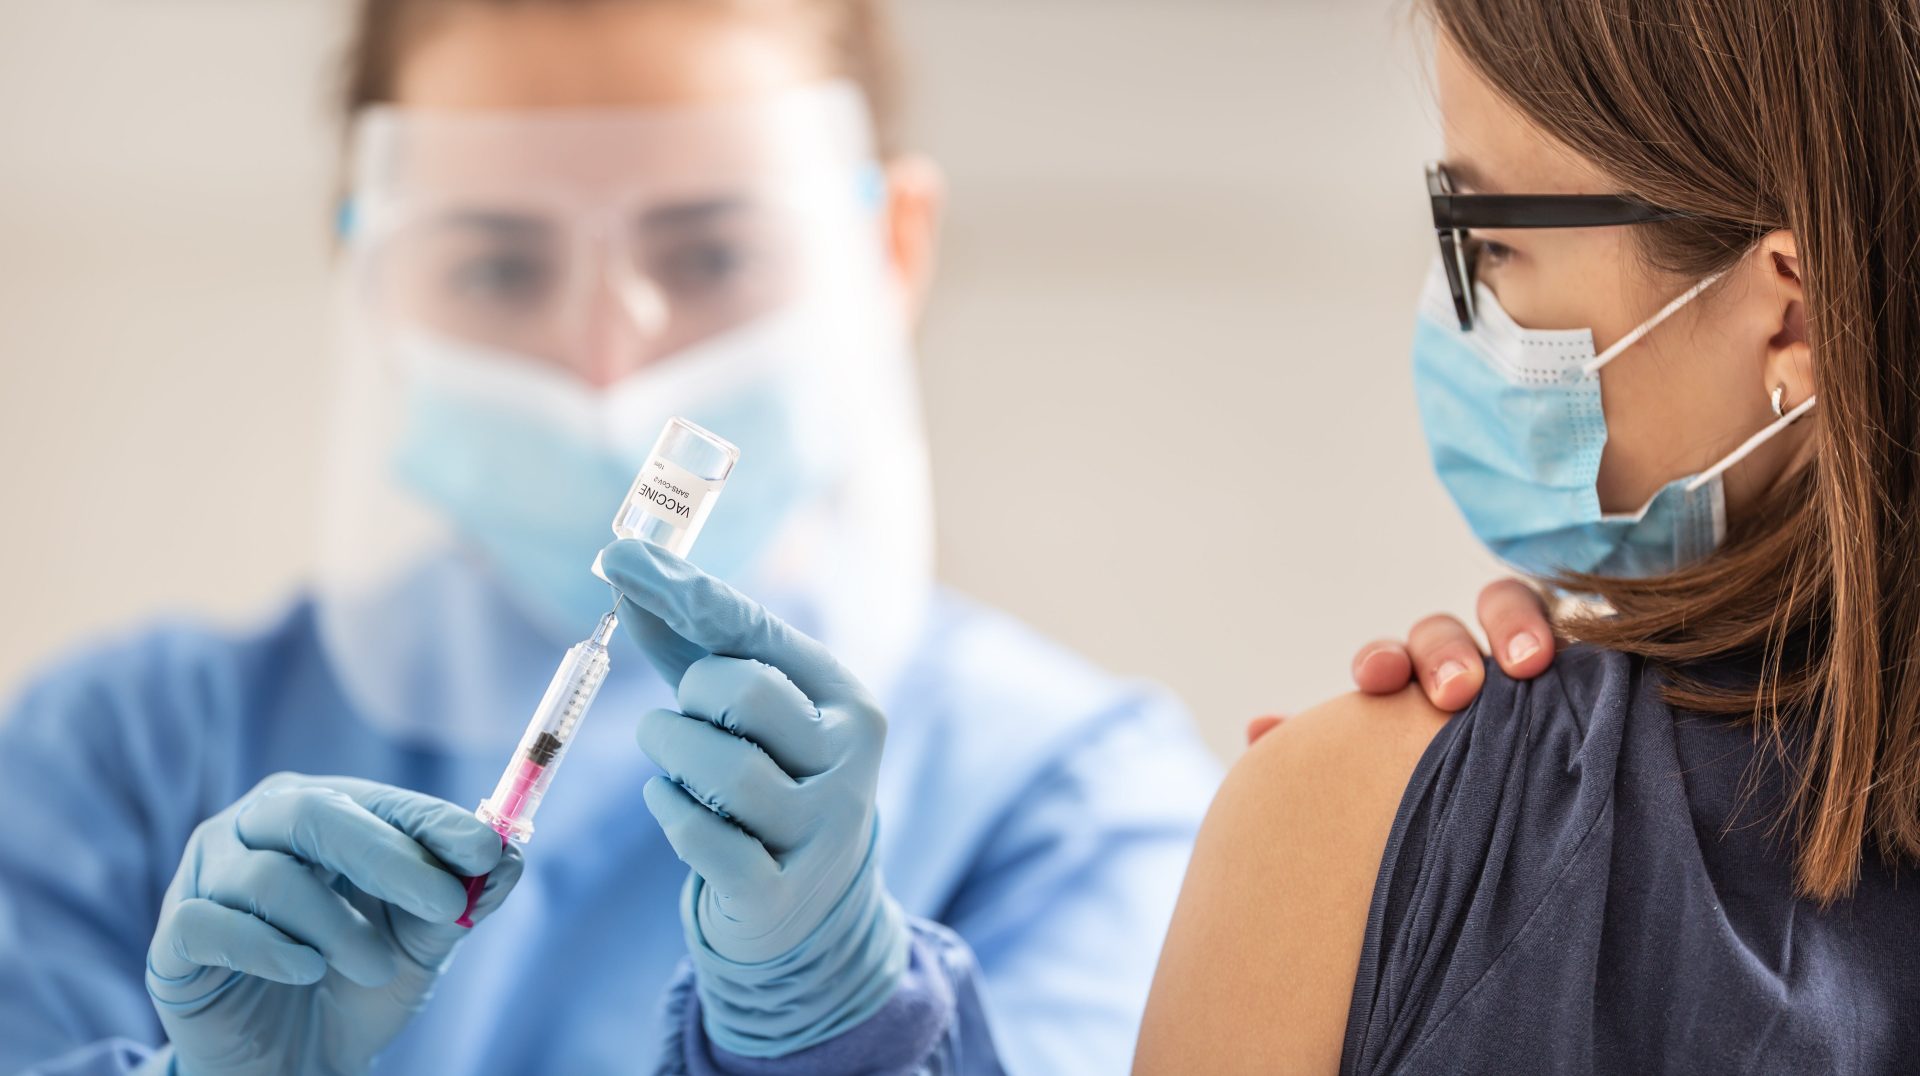 Teens Can Indirectly Get Vaccinated in opposition to COVID